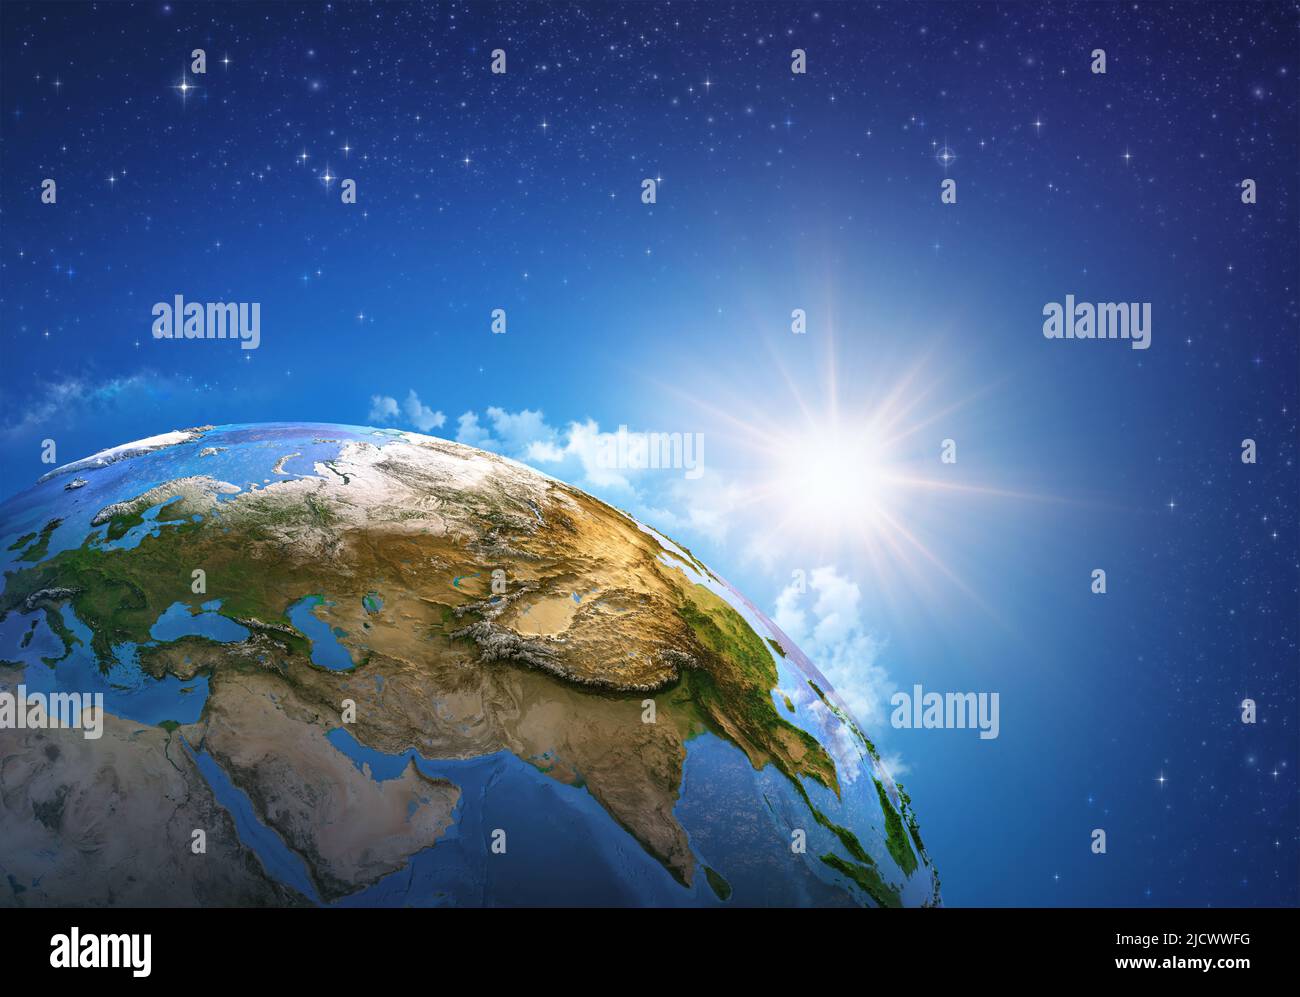 Global warming on Planet Earth, viewed from space focusing on East Asia, China, Russia. Earth globe in deep space, sun rising on the horizon. Stock Photo